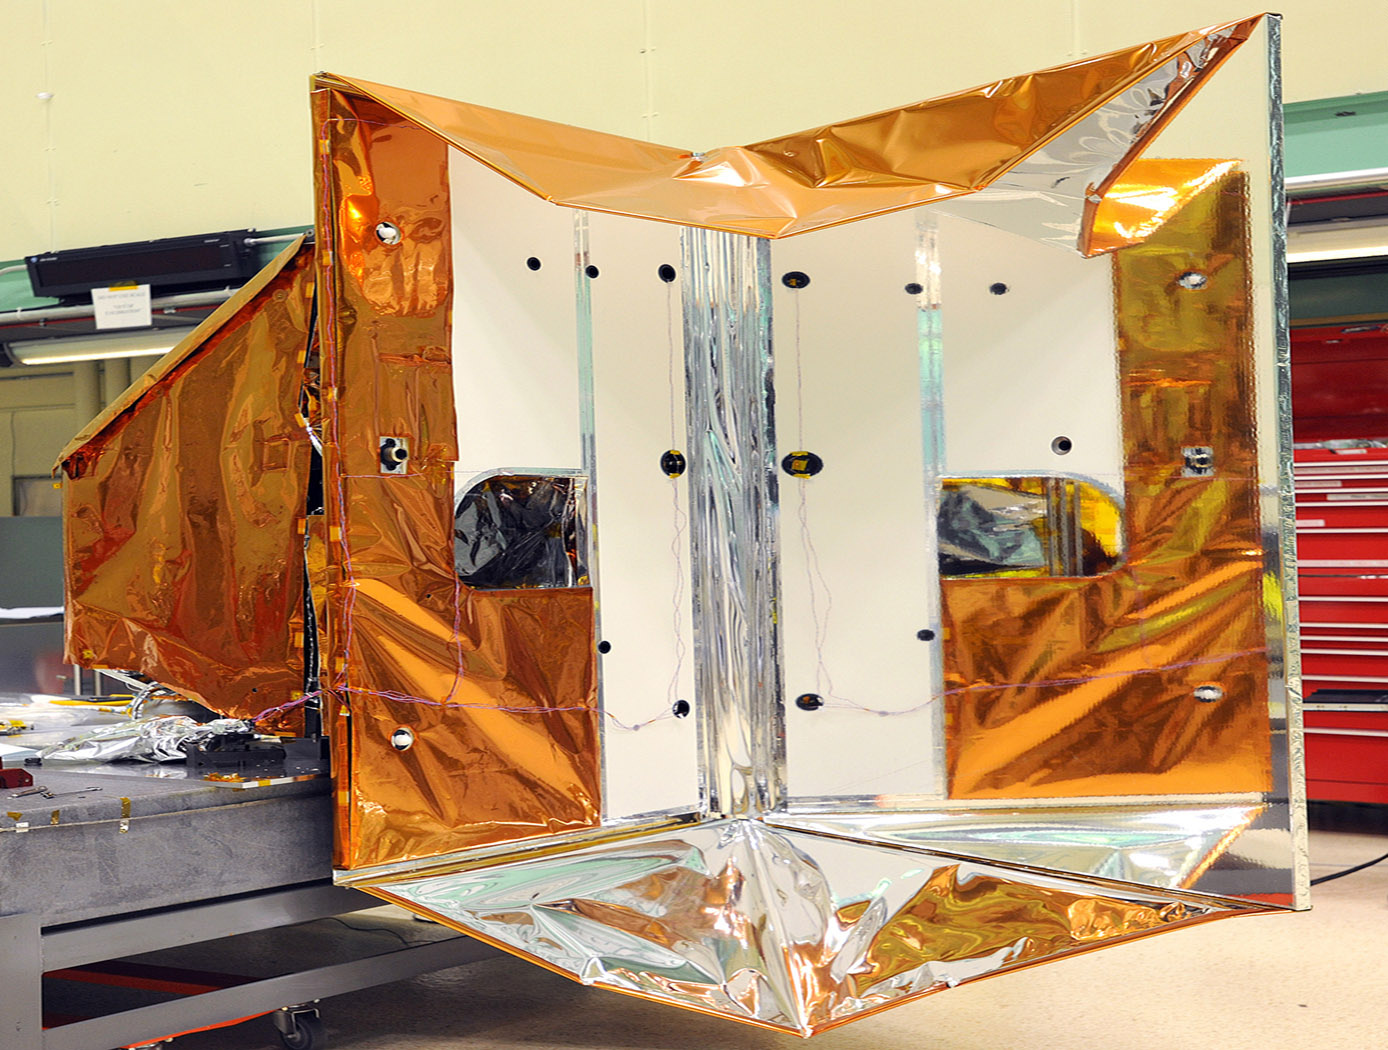 On the right side of the instrument is a large mirror. It's called the 'Earth Shield.' When it's in space it blocks the heat from Earth that would otherwise heat up the instrument. On the left is the instrument's radiator. The black dot in the center of the frame is the cold calibration point. The Thermal Infrared Sensor (TIRS) will fly on the next Landsat satellite, the Landsat Data Continuity Mission (LDCM). TIRS was built on an accelerated schedule at NASA's Goddard Space Flight Center, Greenbelt, Md. and will now be integrated into the LDCM spacecraft at Orbital Science Corp. in Gilbert, Ariz. The Landsat Program is a series of Earth observing satellite missions jointly managed by NASA and the U.S. Geological Survey. Landsat satellites have been consistently gathering data about our planet since 1972. They continue to improve and expand this unparalleled record of Earth's changing landscapes for the benefit of all.